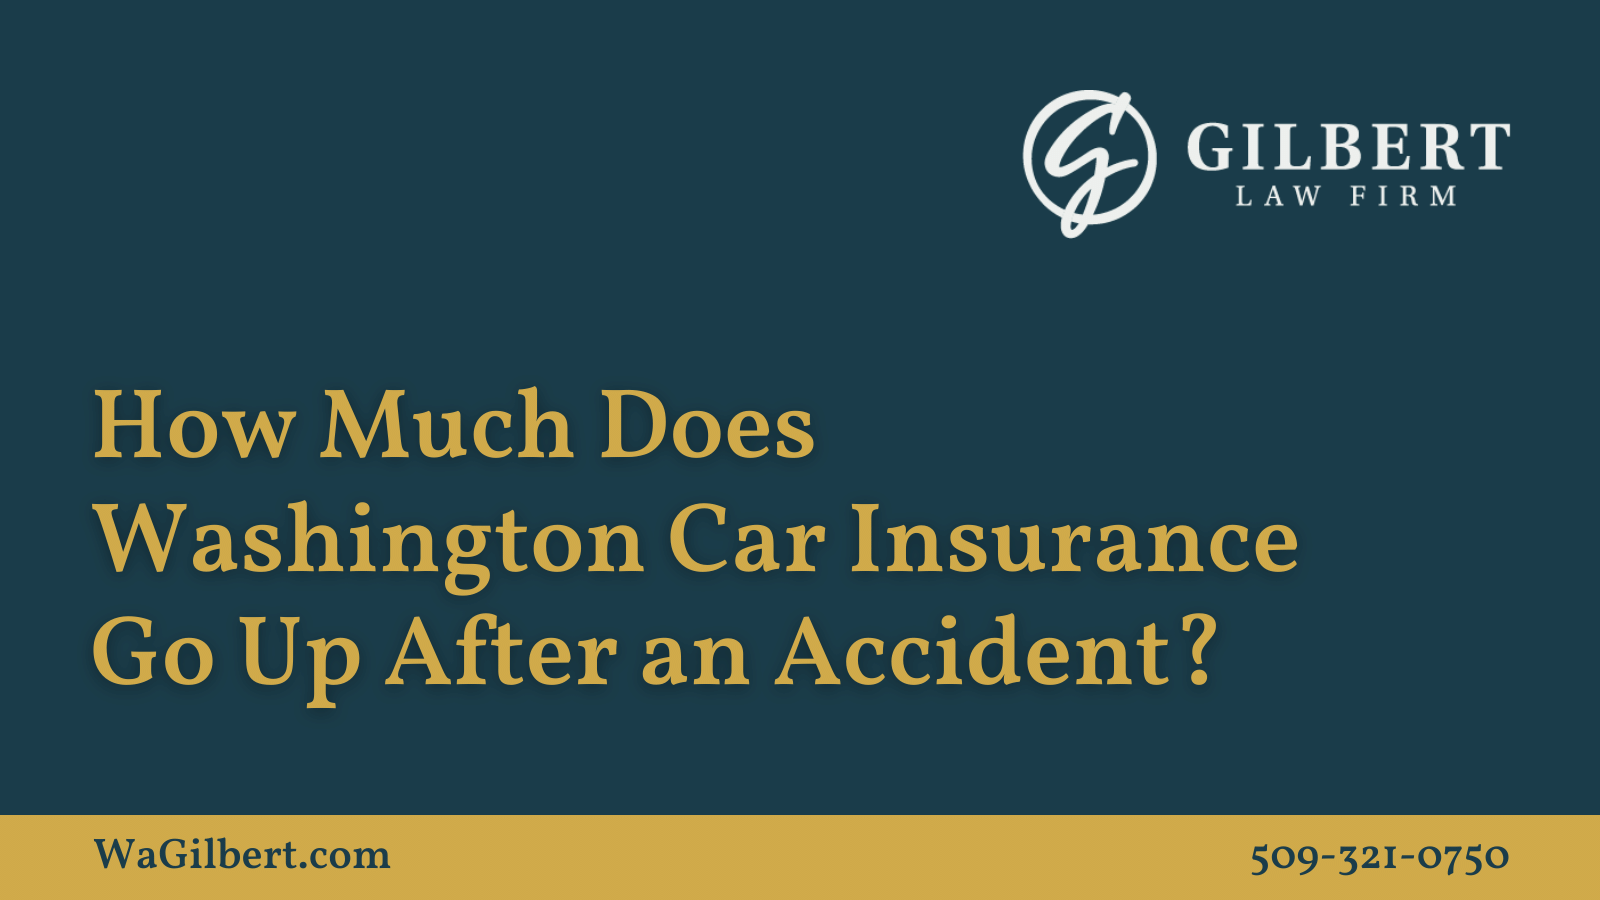 How Much Does Washington Car Insurance Go Up After an Accident | Gilbert Law Firm Spokane Washington